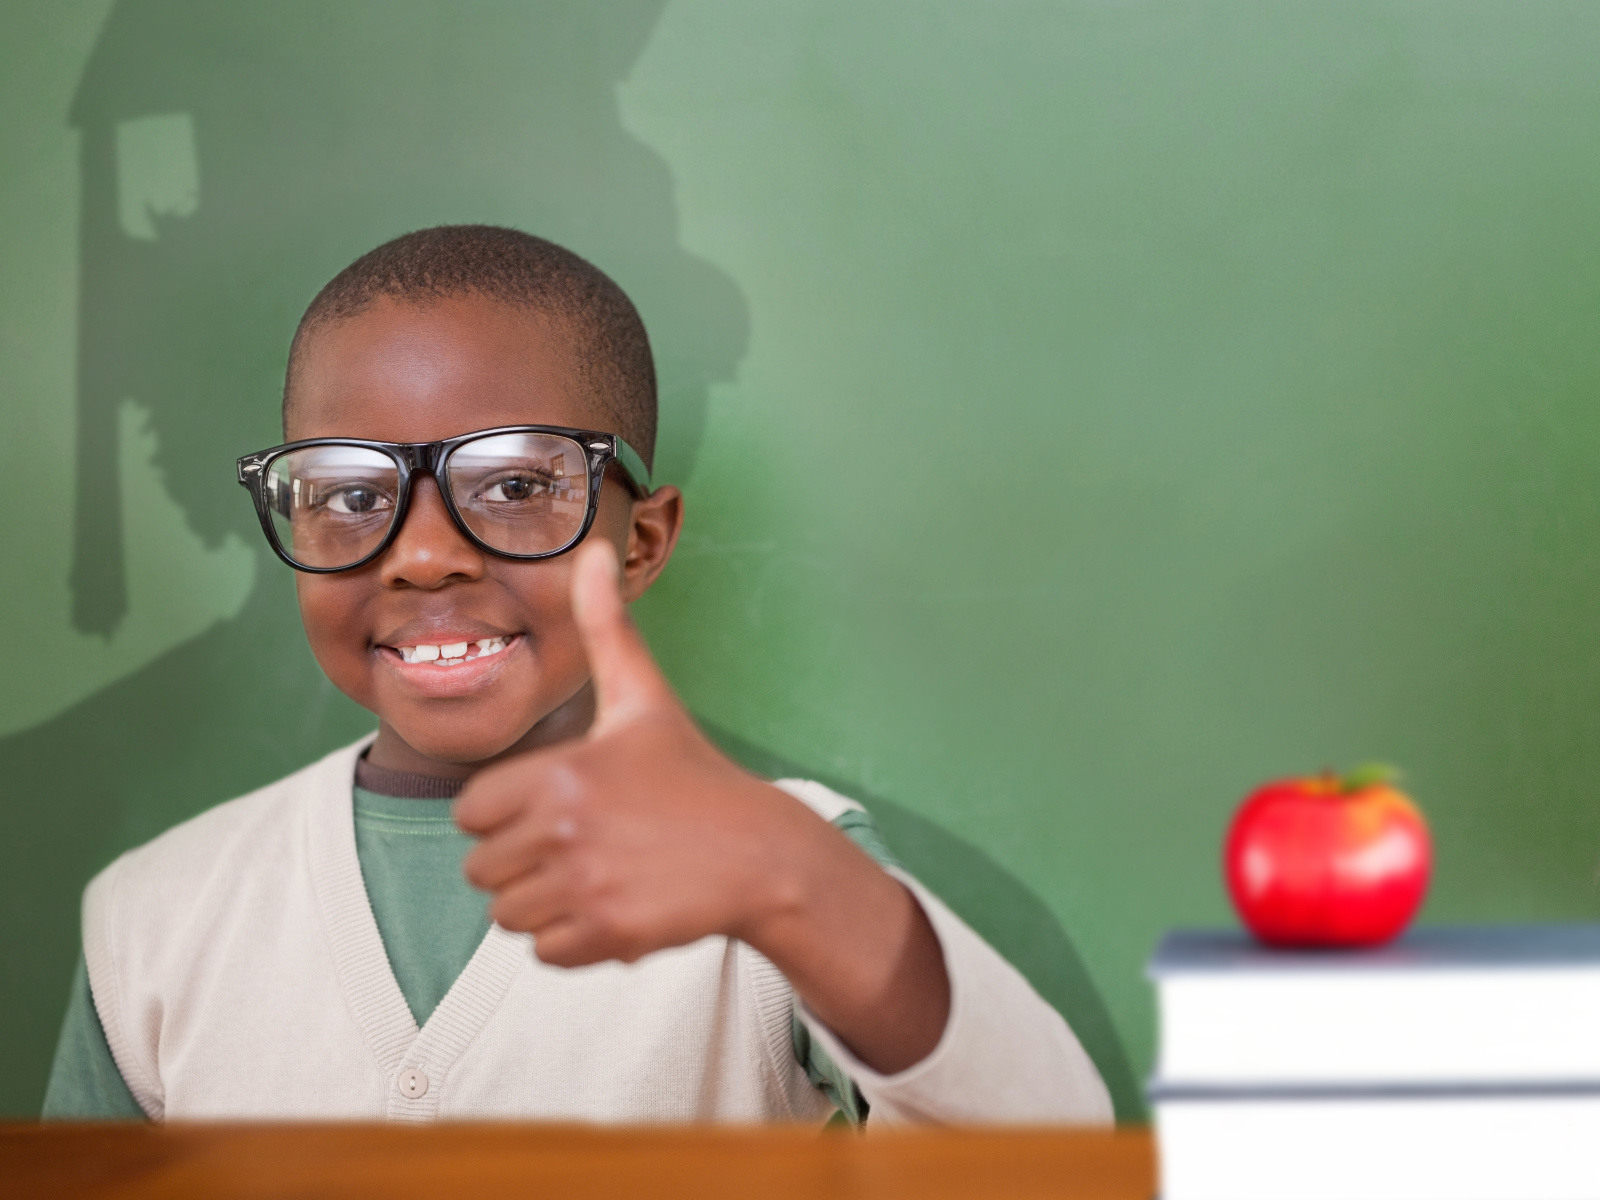 a smiling African American boy doing the thumbs-up gesture